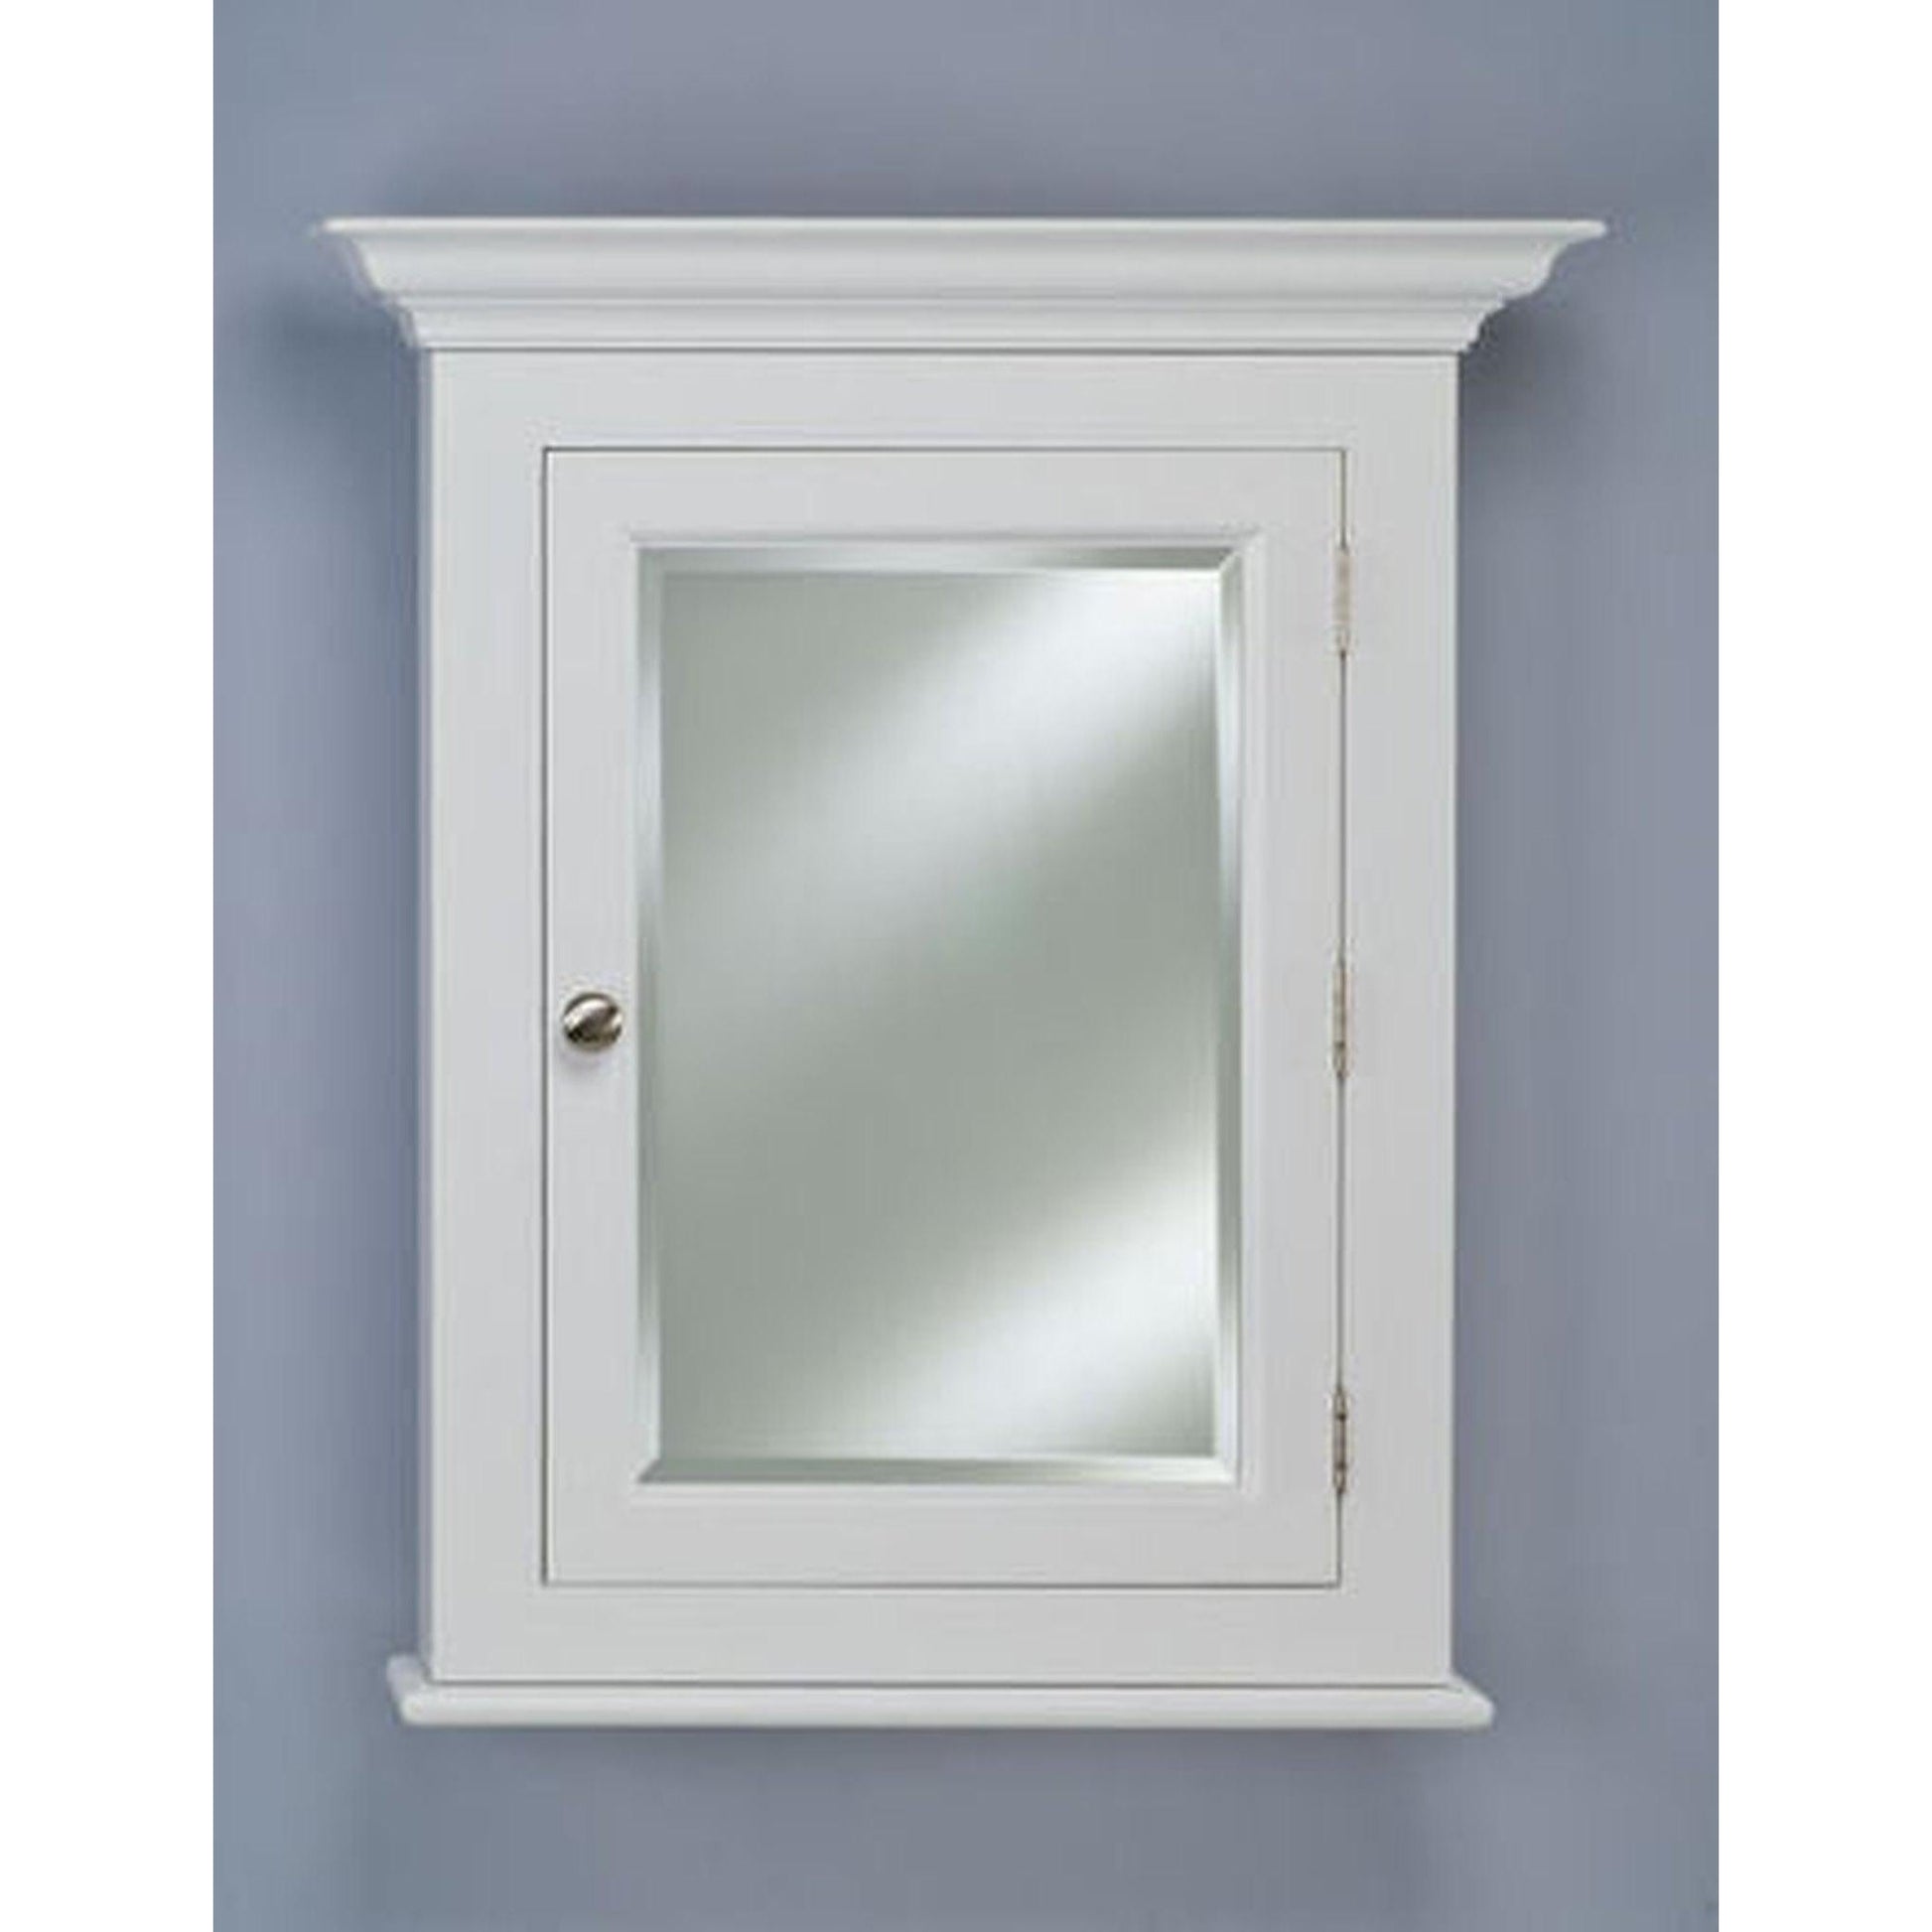 Afina Wilshire II Large White Semi-Recessed Right Hinged Single Door Medicine Cabinet With Beveled Edge Mirror